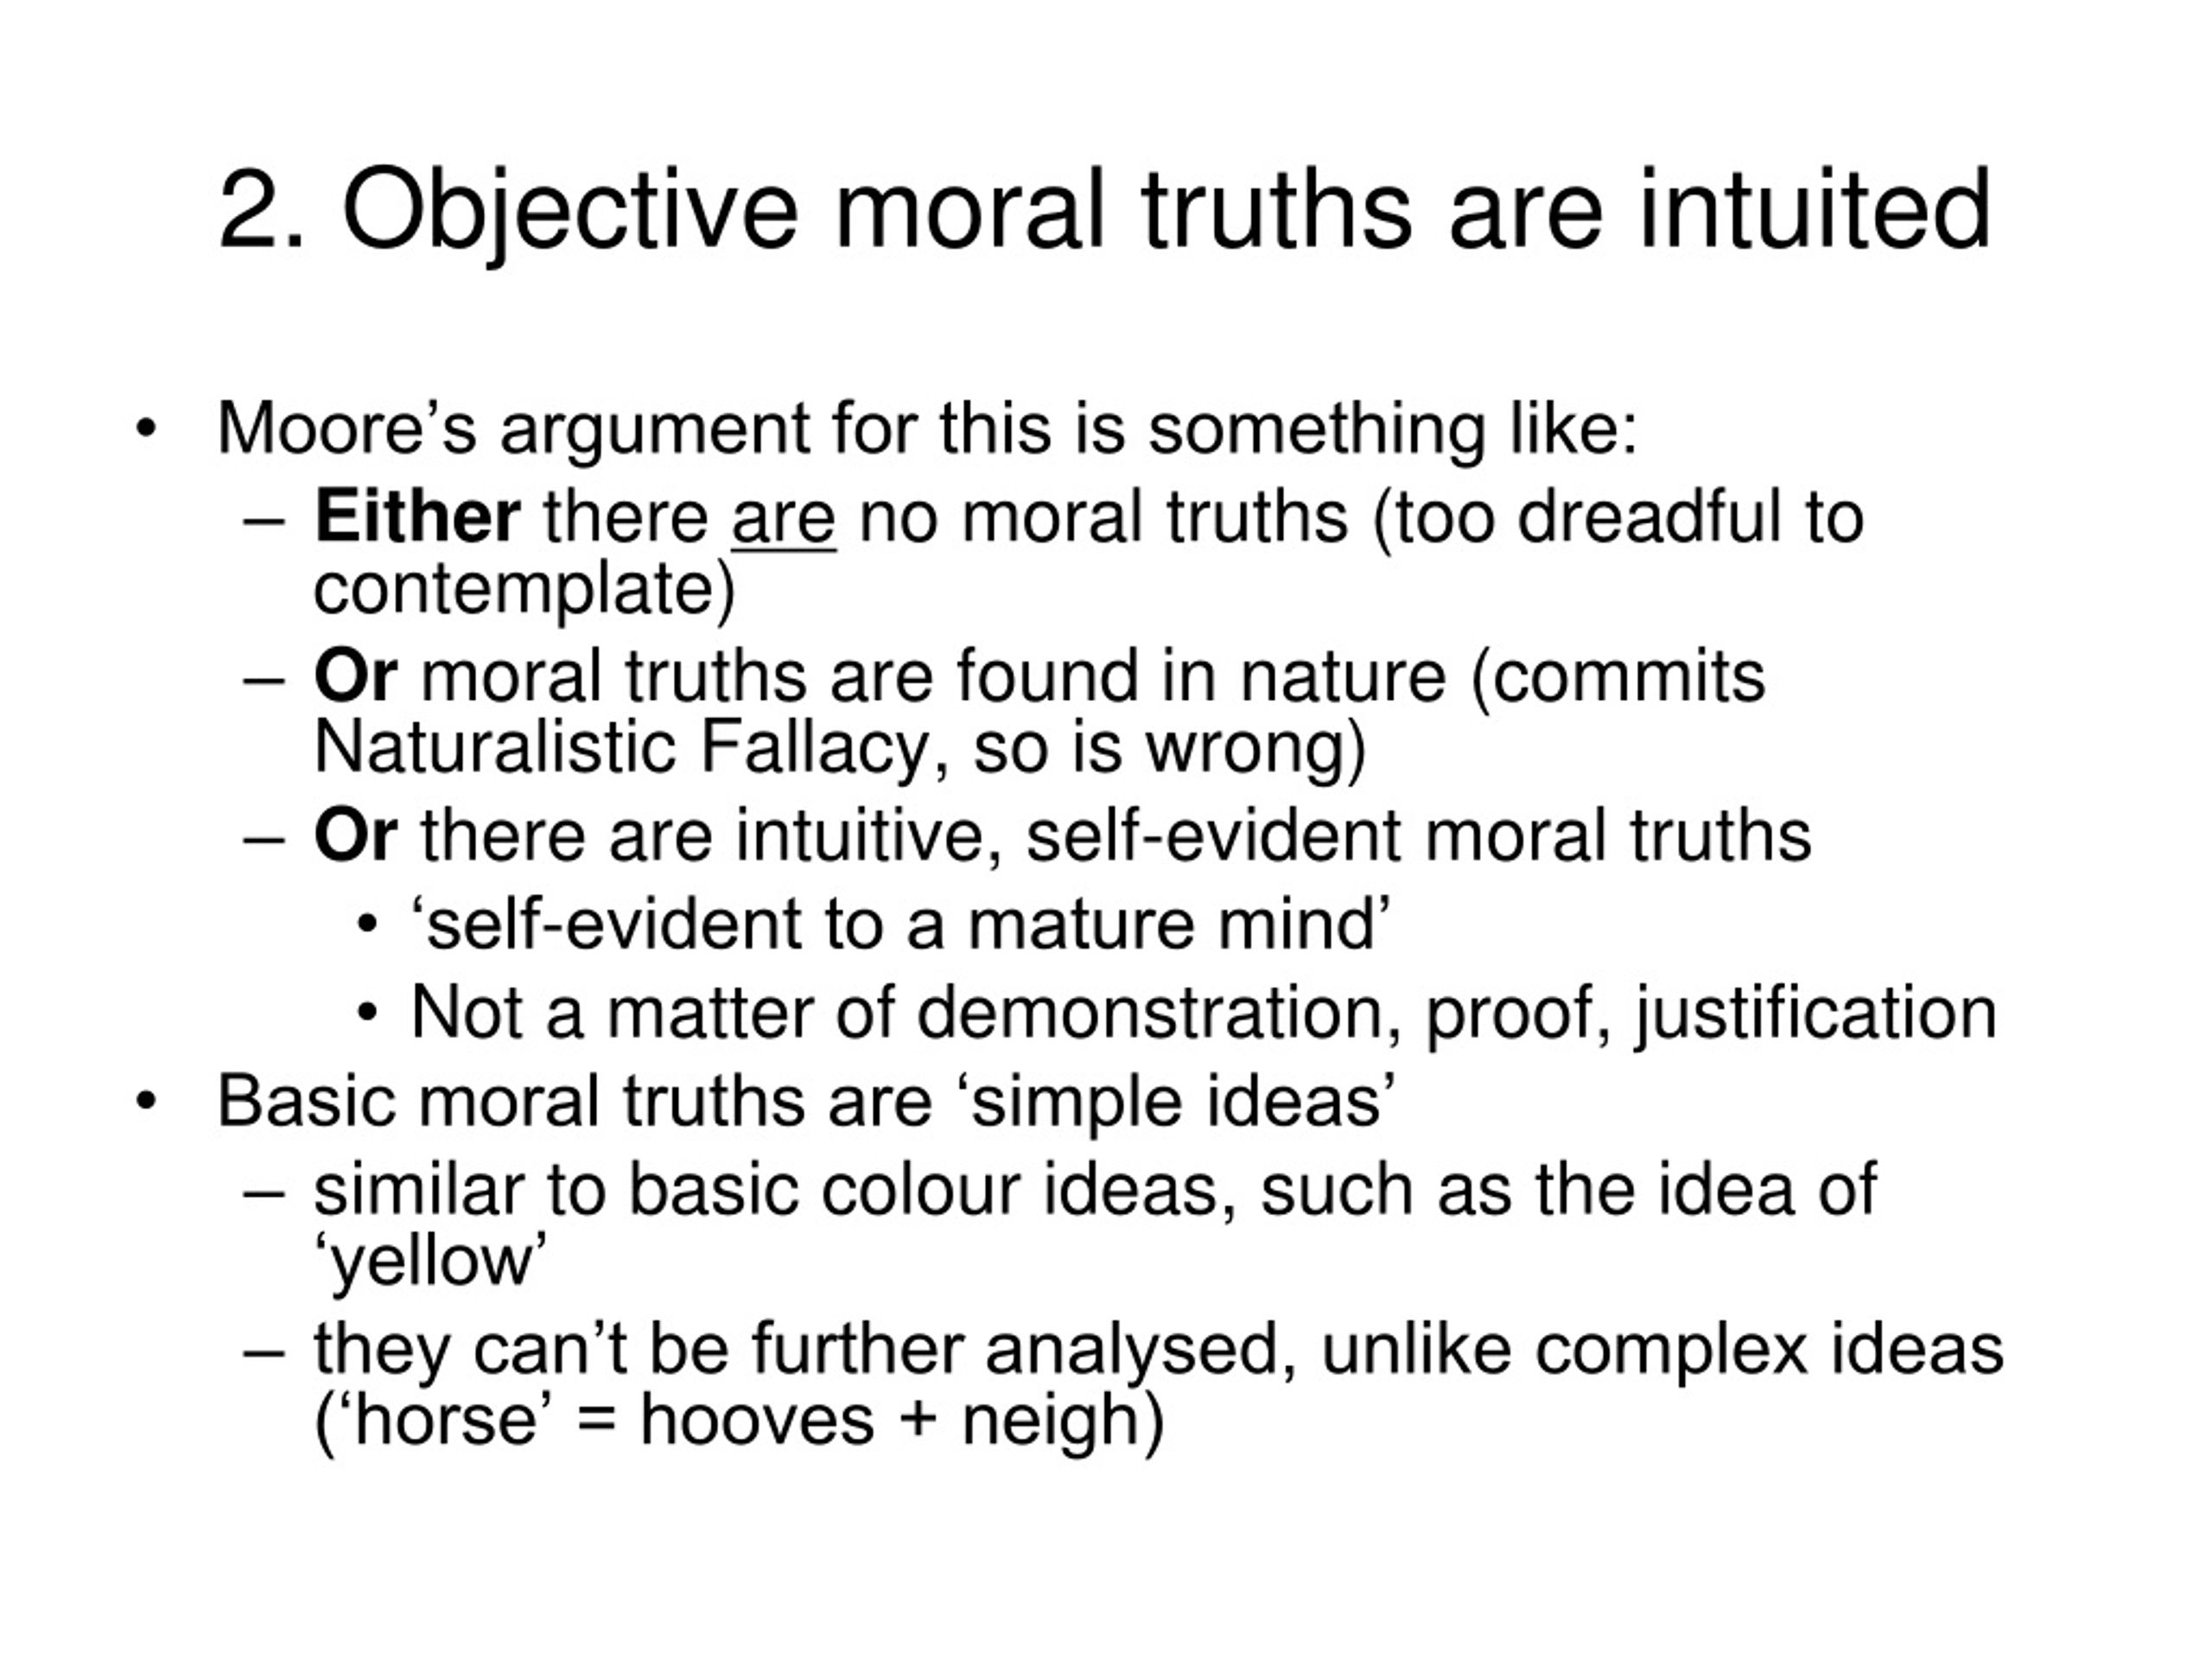 the thesis that there are objective moral truths